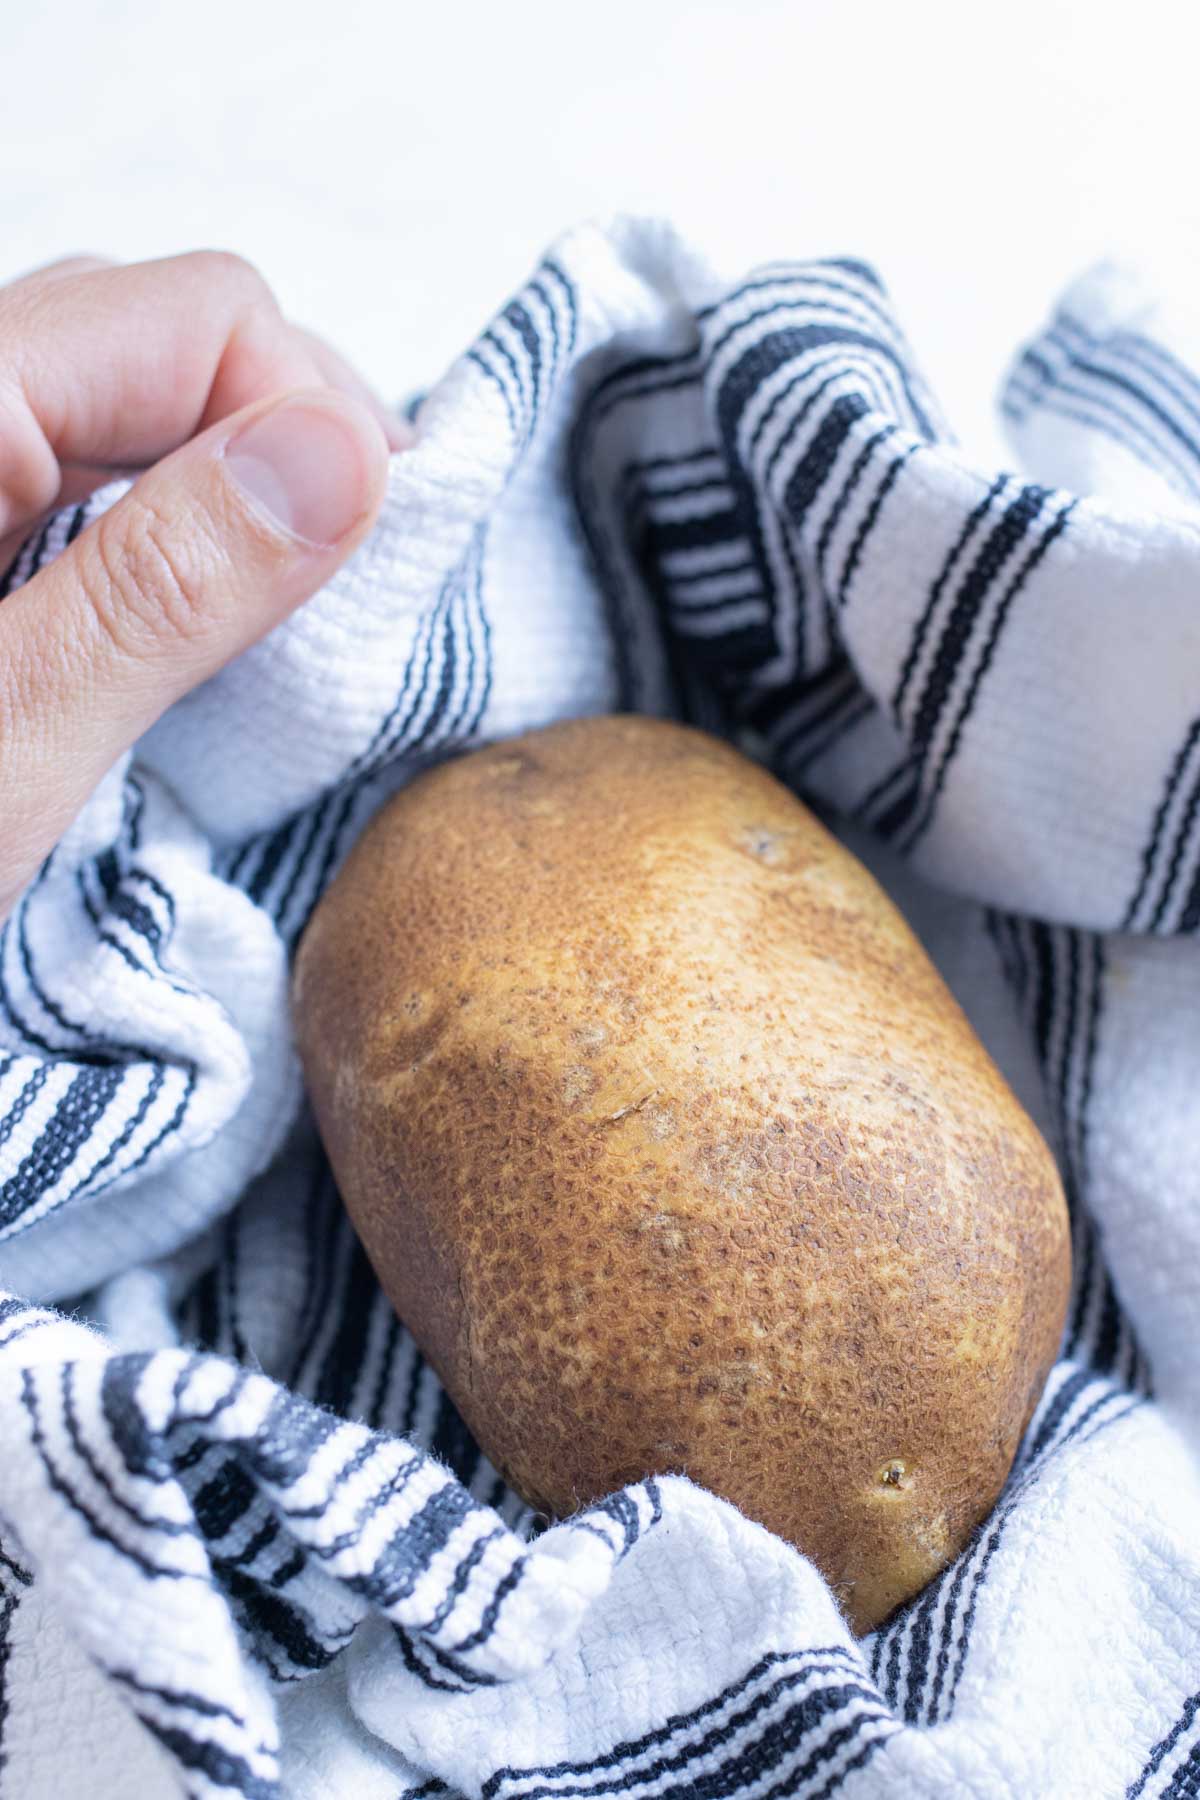 Dry the potatoes with a towel.